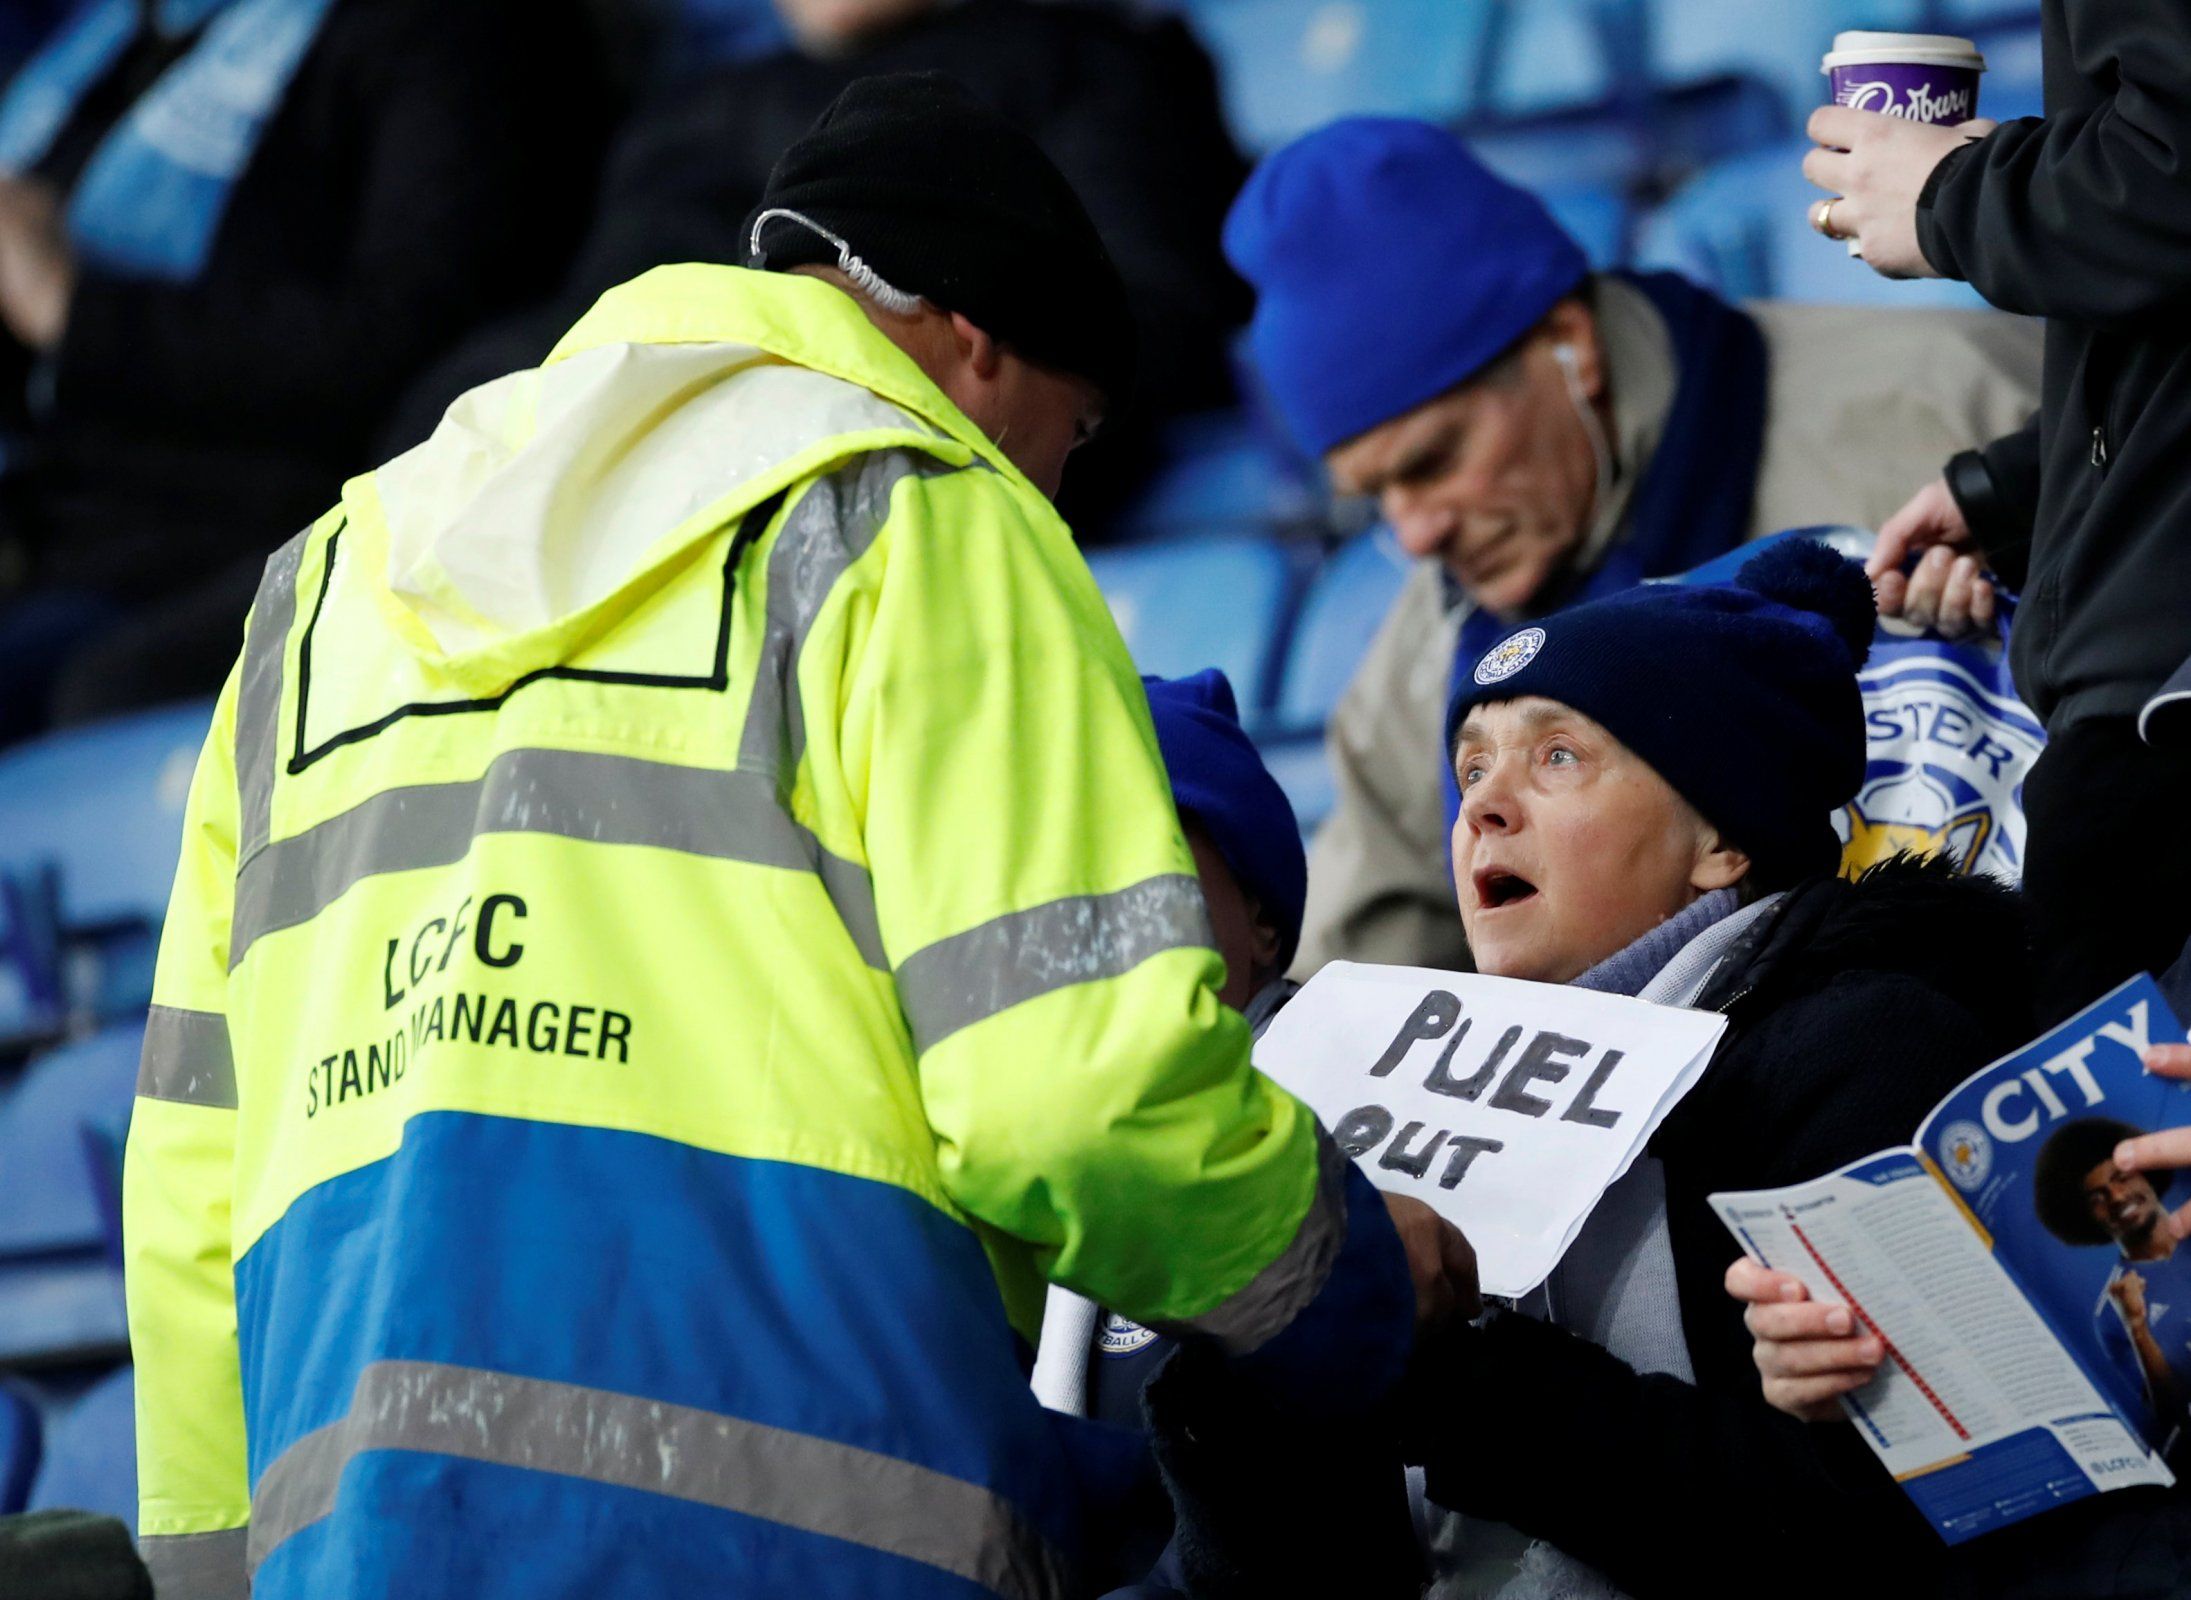 A Leicester City steward confiscates a sign saying 'Puel Out' from a fan before the Southampton match